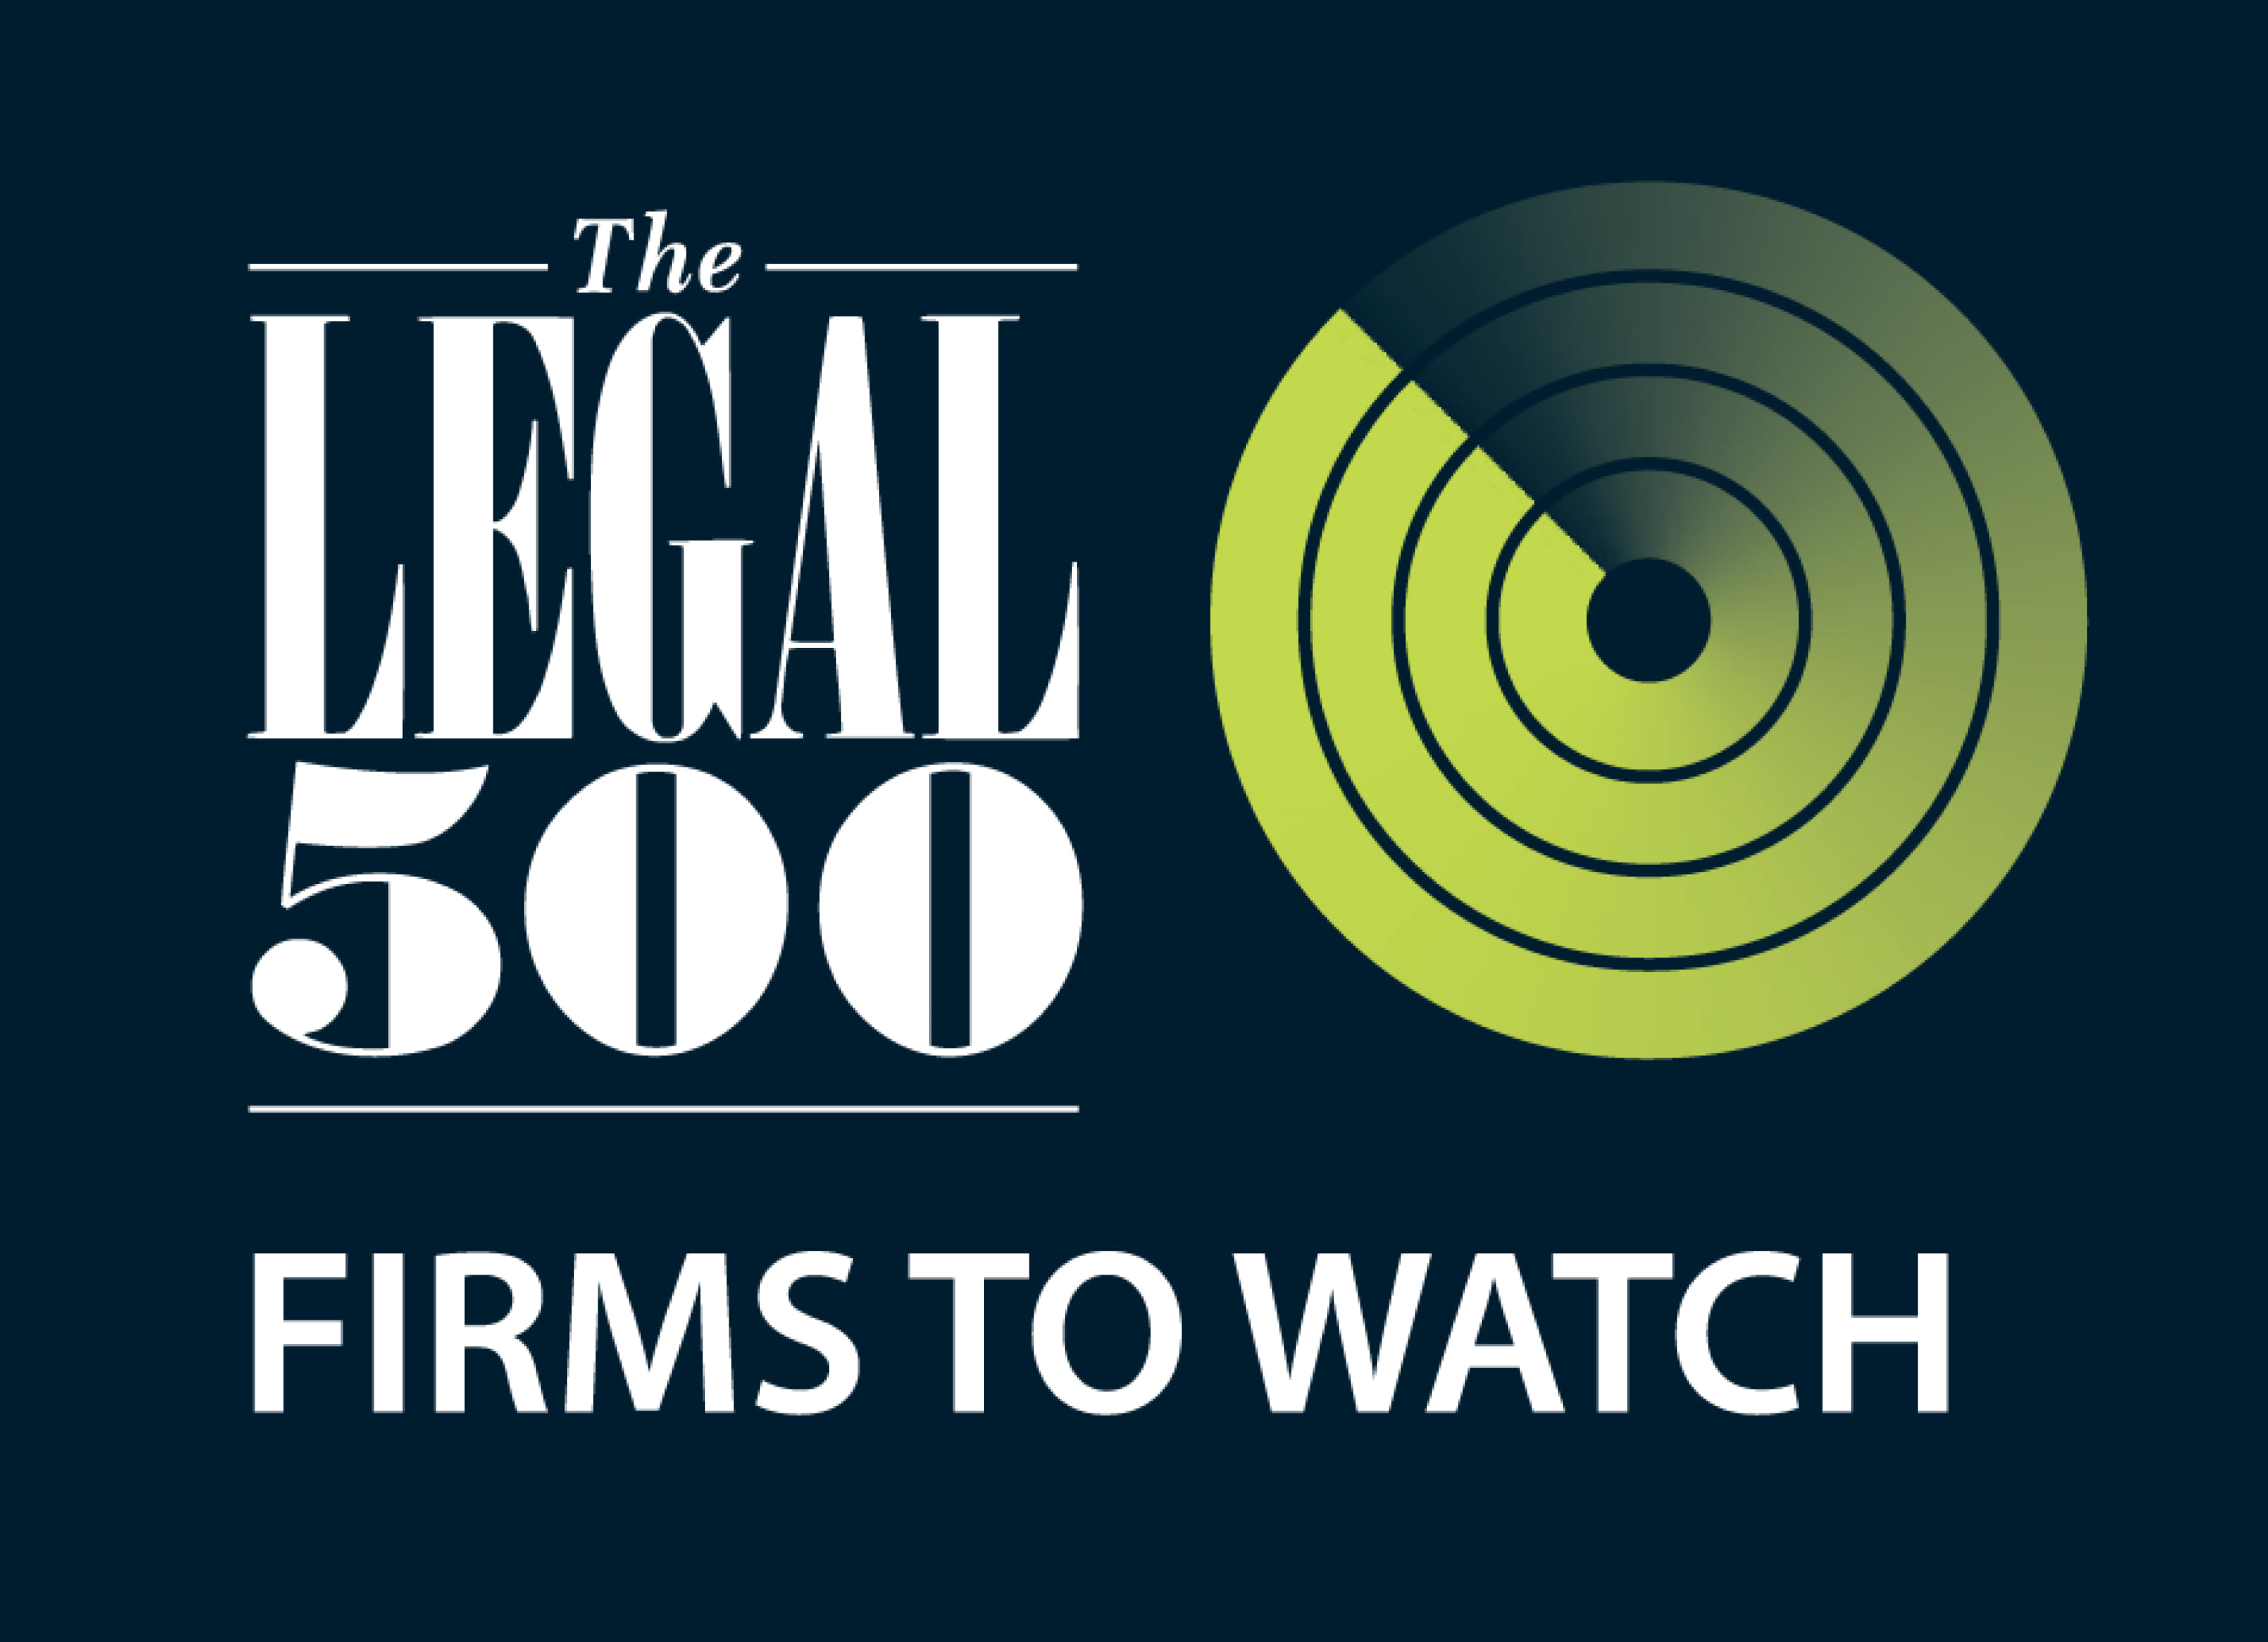 “Firms to Watch” in Corporate (including M&A) by The Legal 500 Asia Pacific 2022